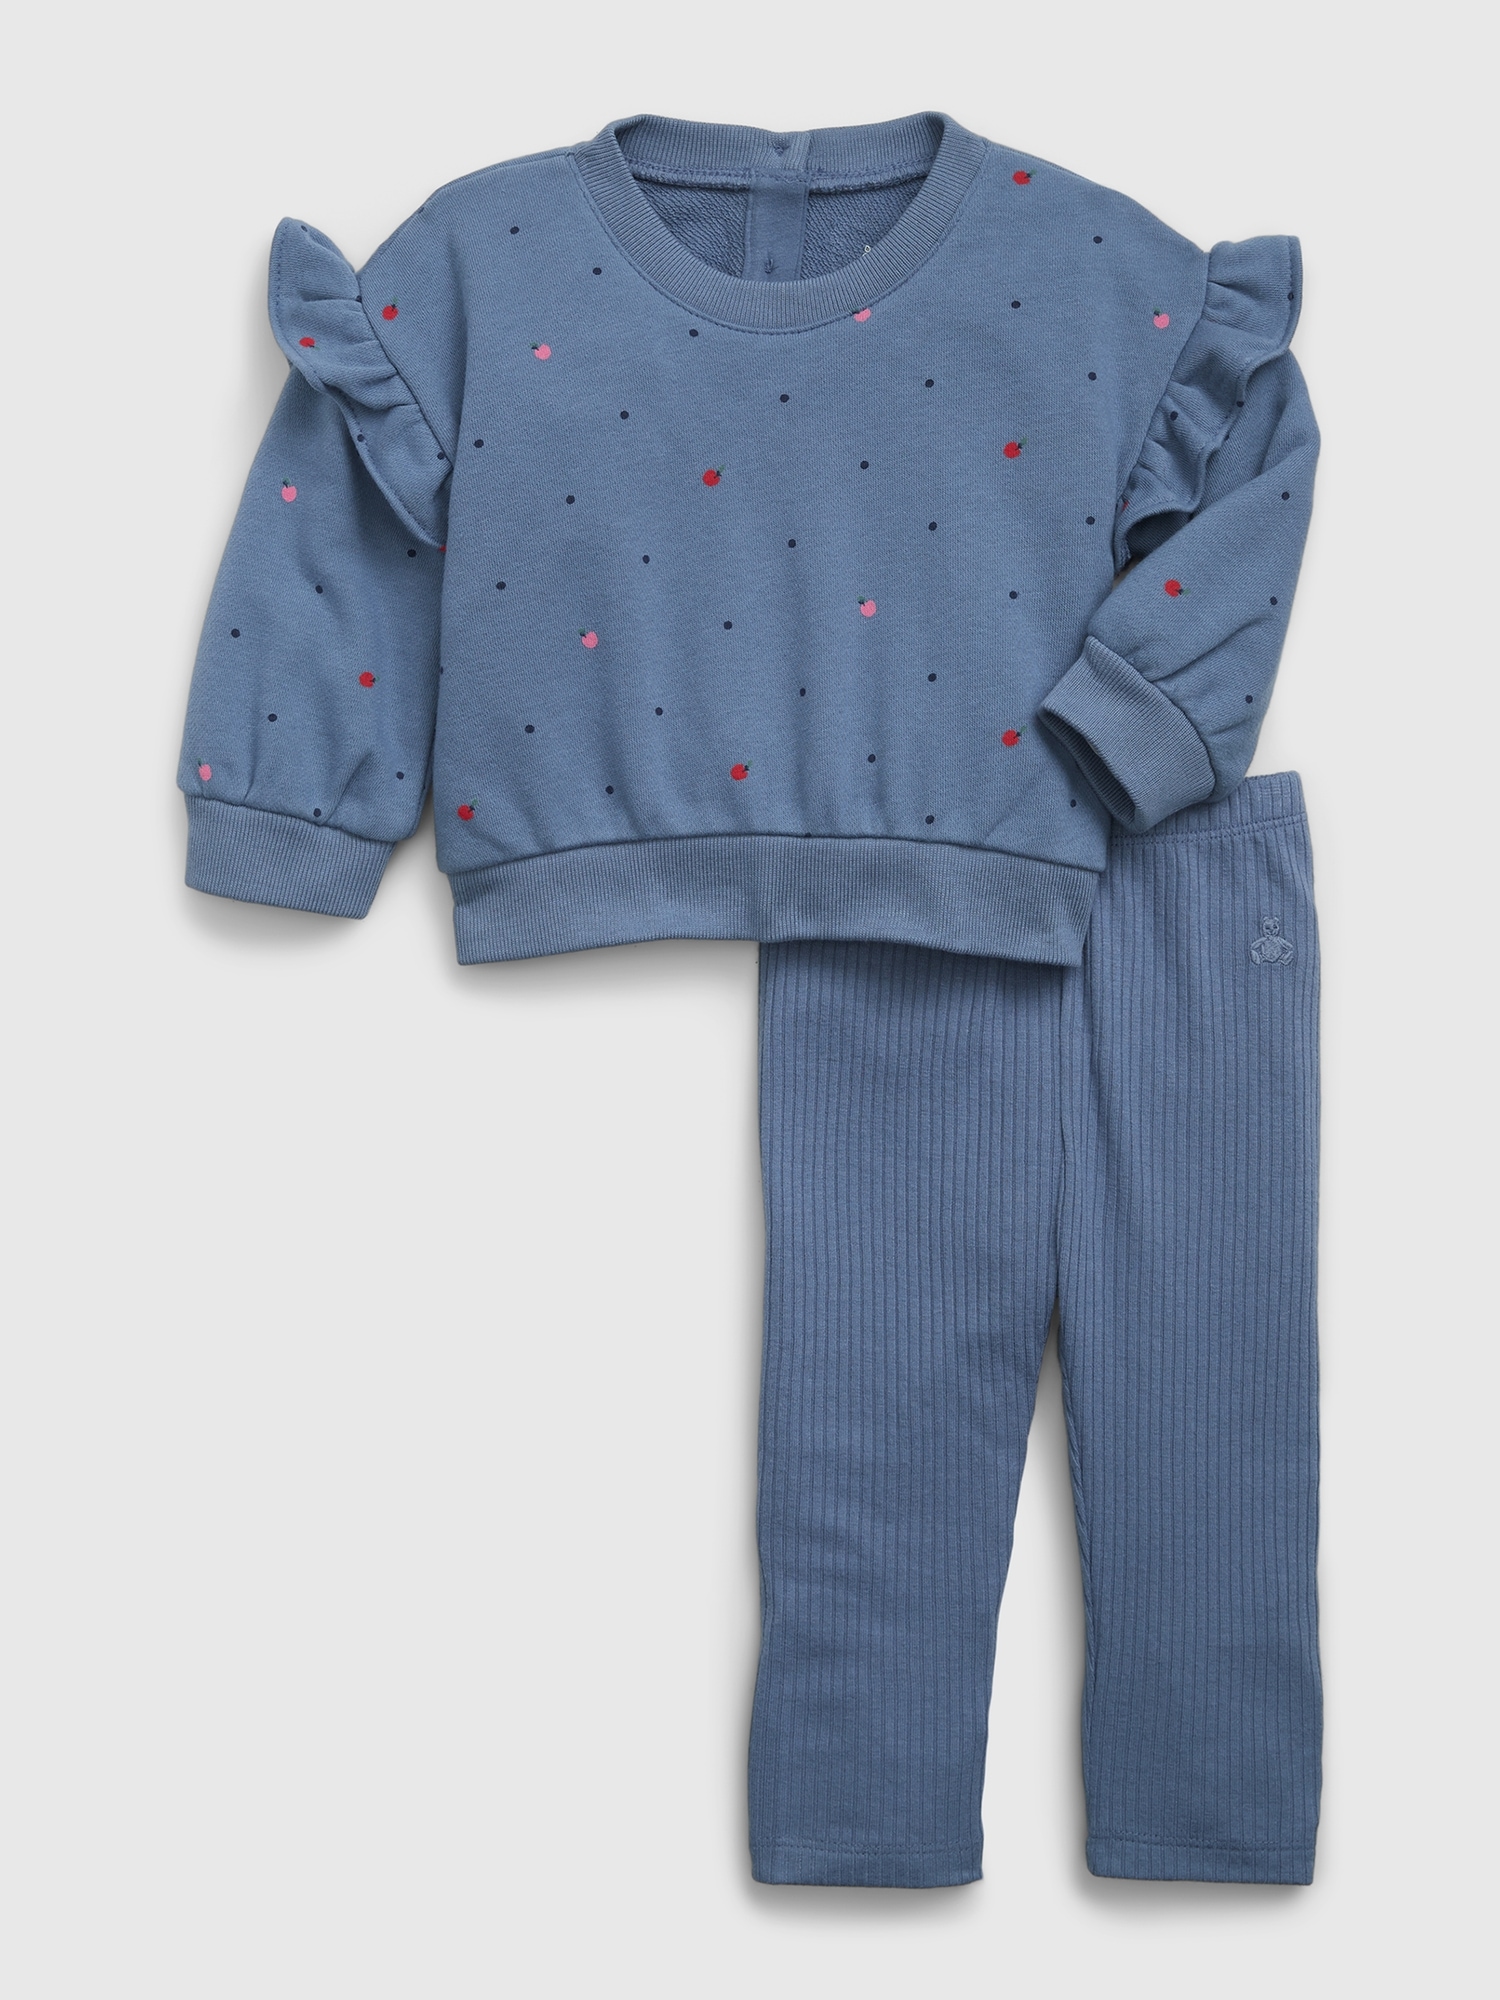 Baby Ruffle Two-Piece Outfit Set | Gap